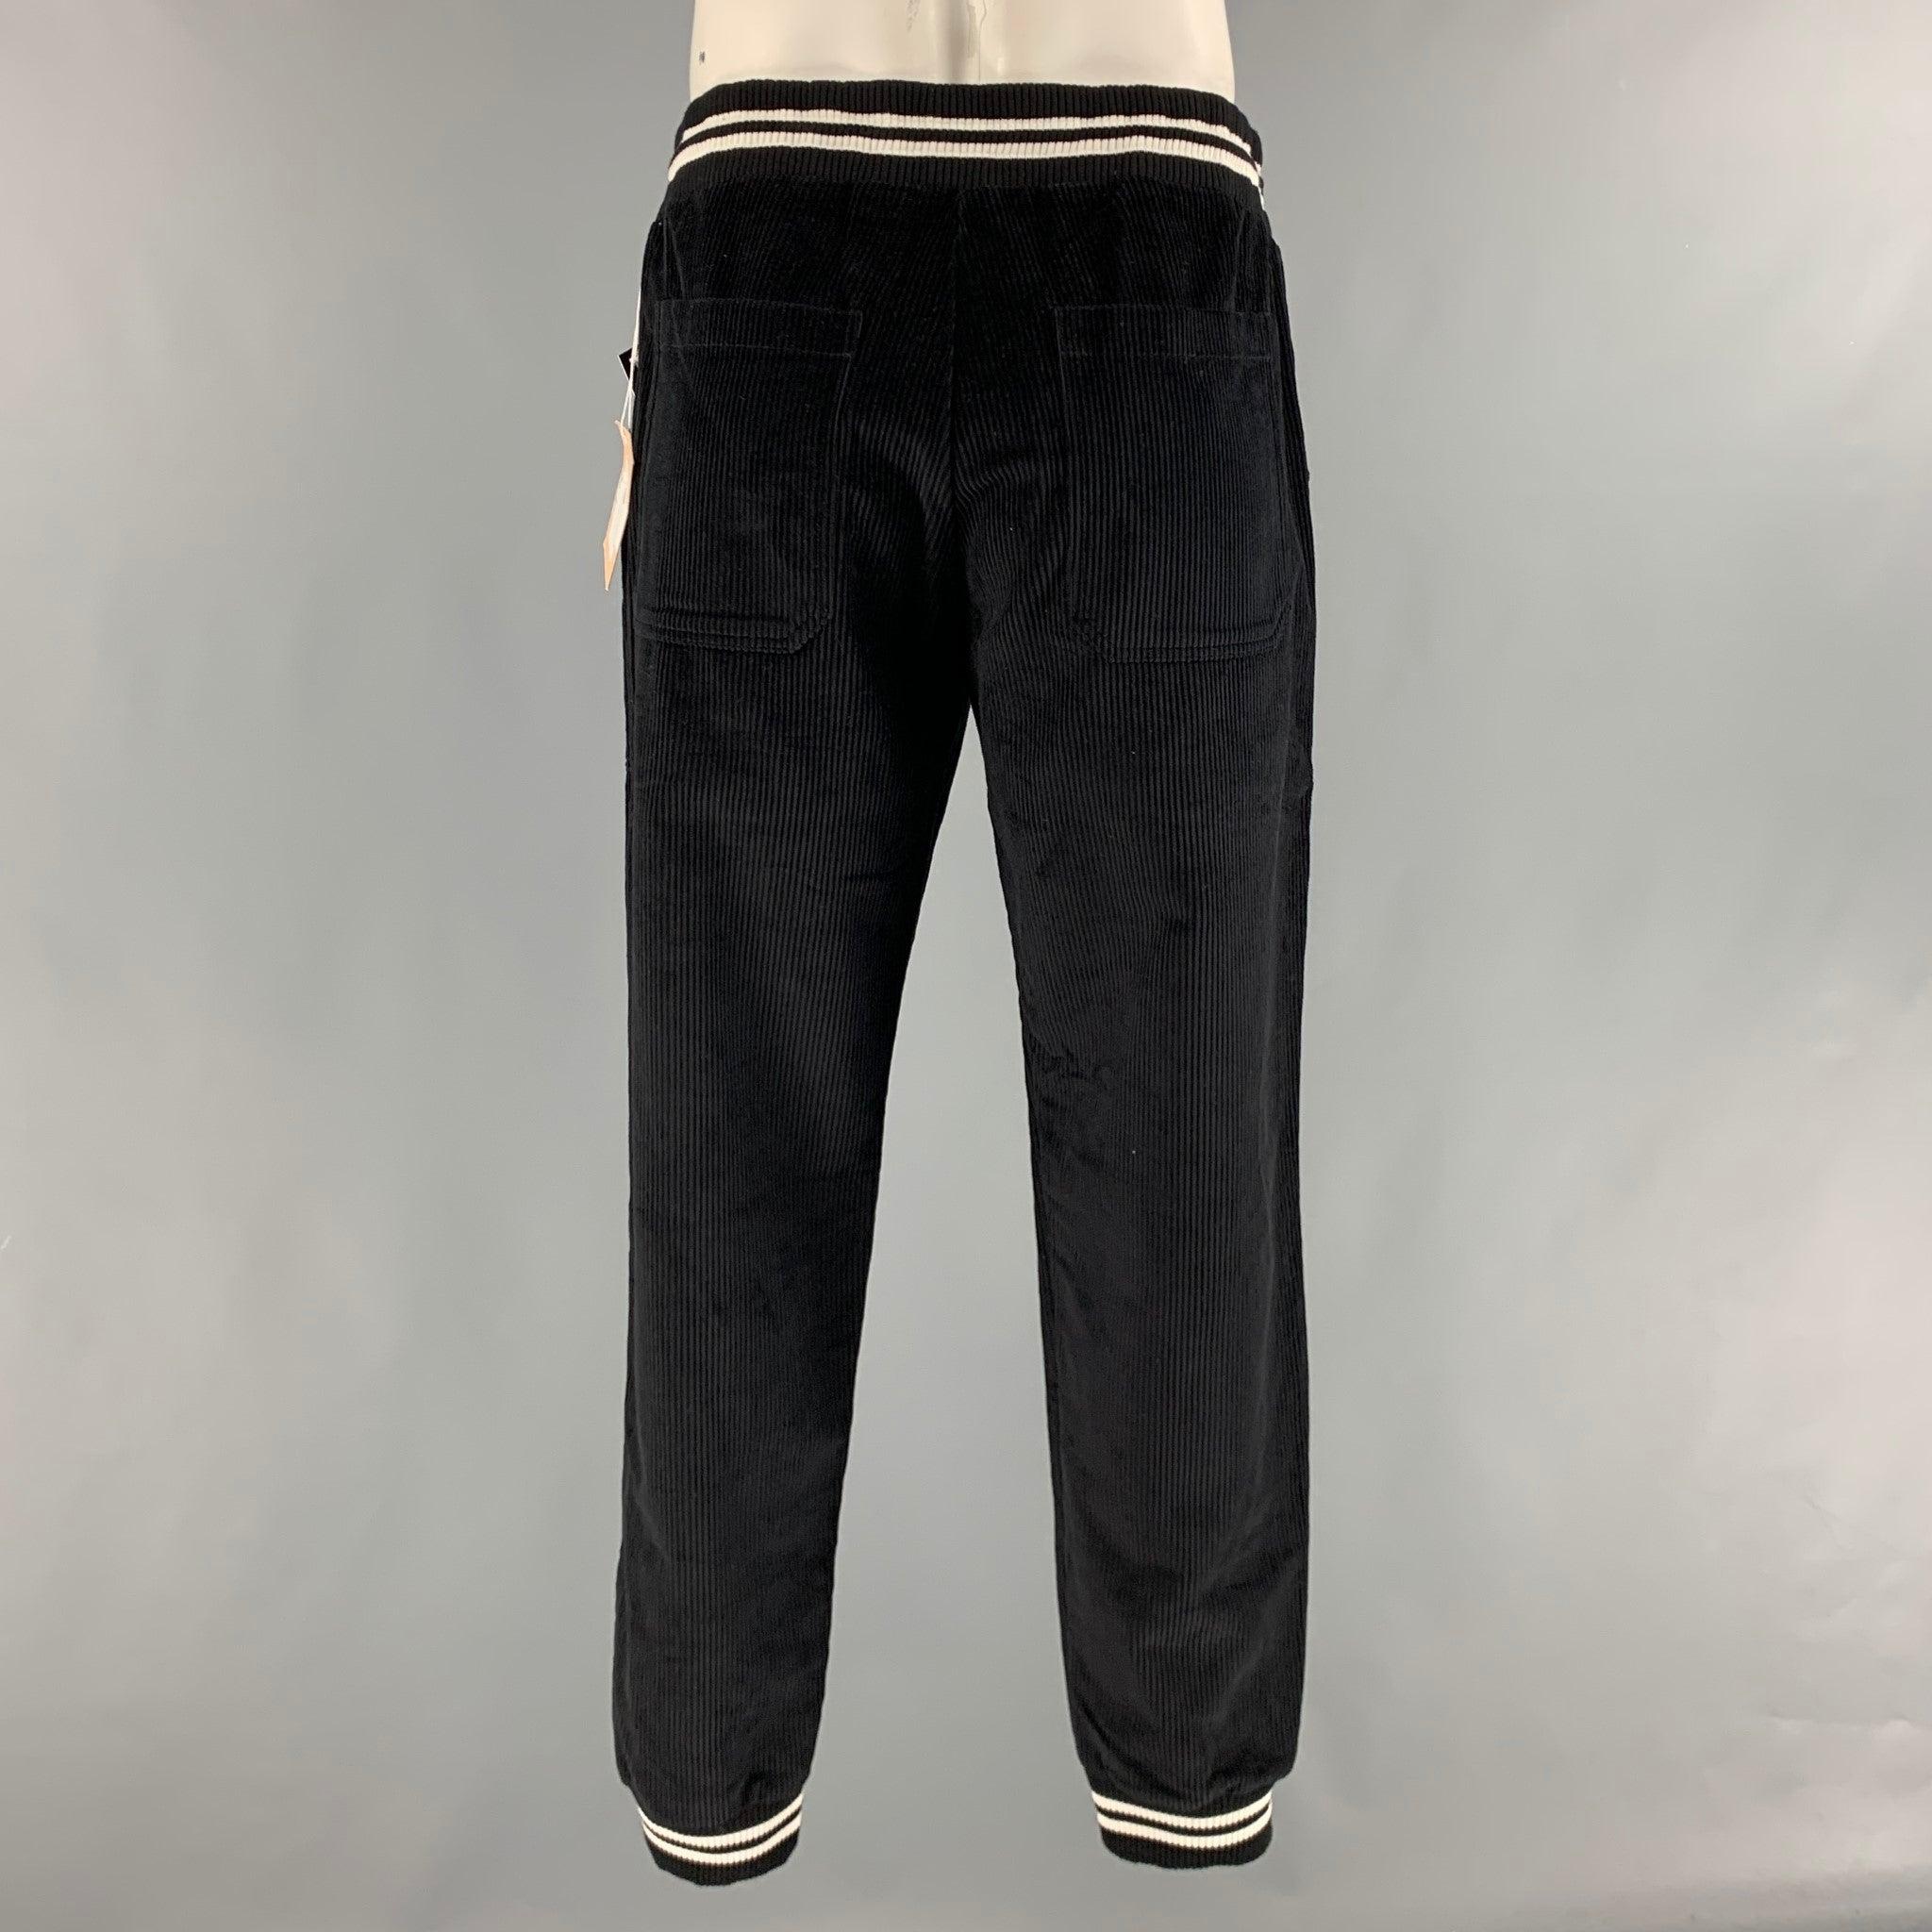 BAND OF OUTSIDERS sweatpants in a black corduroy cotton material featuring black and white ribbed accents, a drawstring waistband and an elastic hem.New with Tags. 

Marked:   XL 

Measurements: 
  Waist: 33 inches Rise: 10 inches Inseam: 30.5